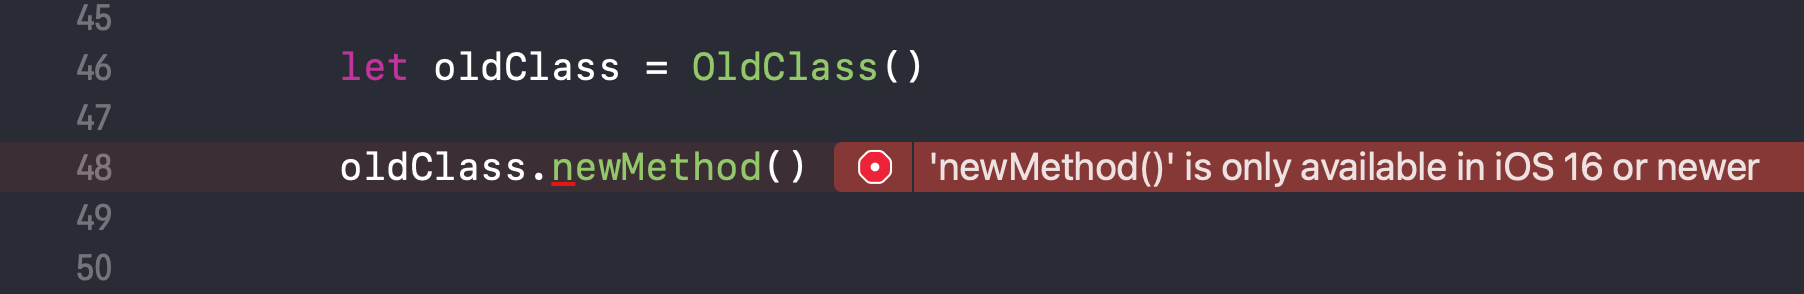 newMethod() is only available in iOS 16 or newer.